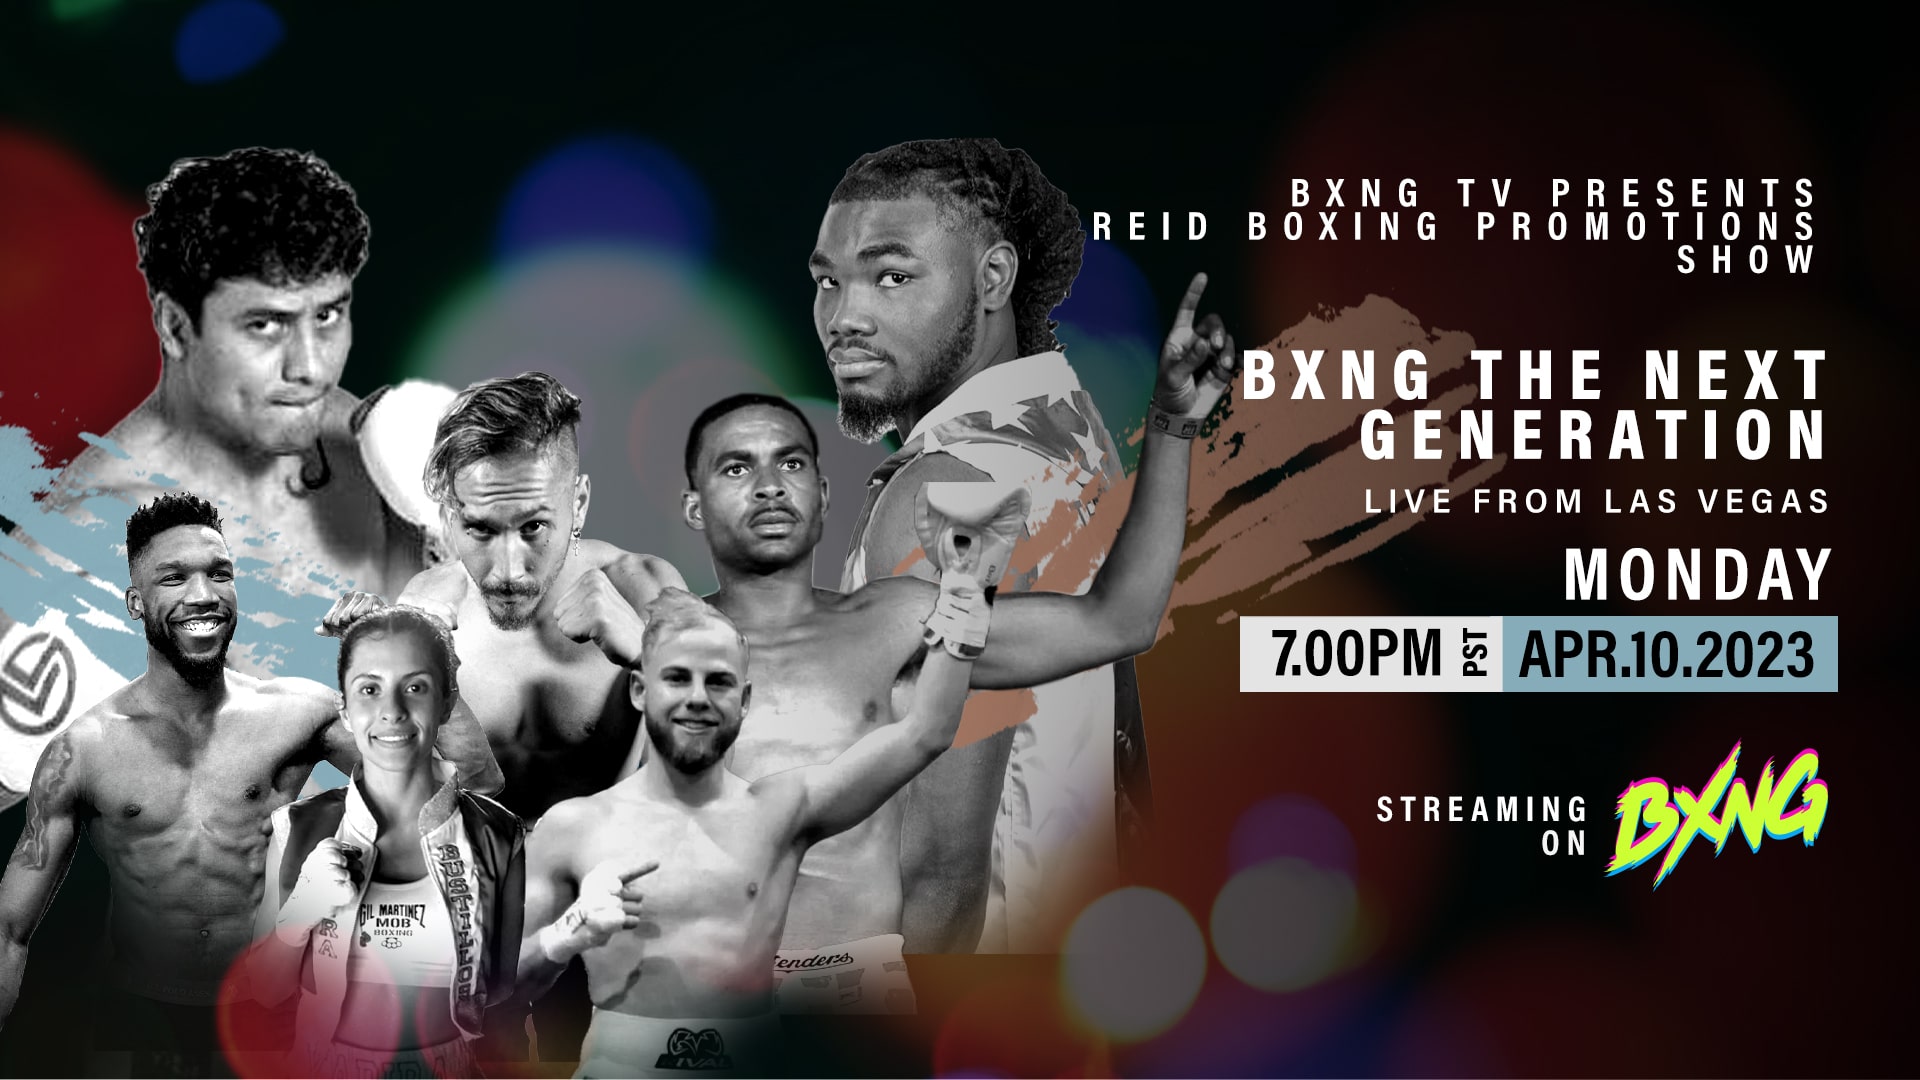 BXNG TV Presents Reid Boxing Promotions Show Live Stream 04/10/23